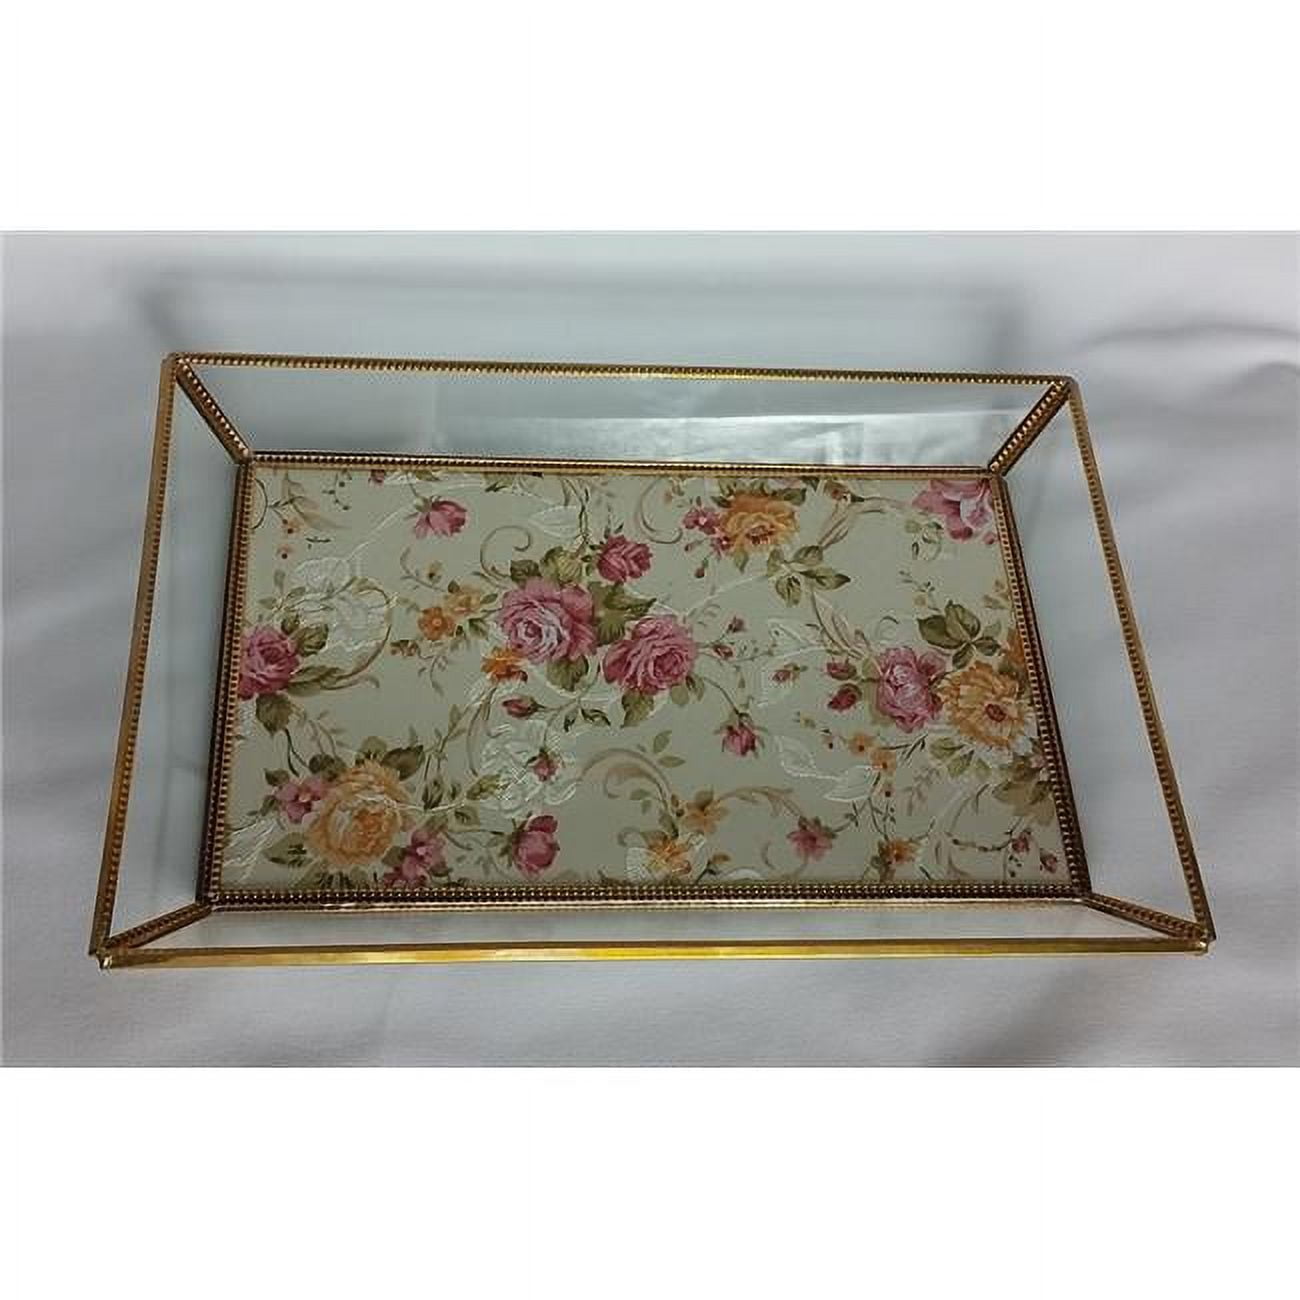 Picture of Jiallo 35887 Mandarin Tray - Rose on Bottom